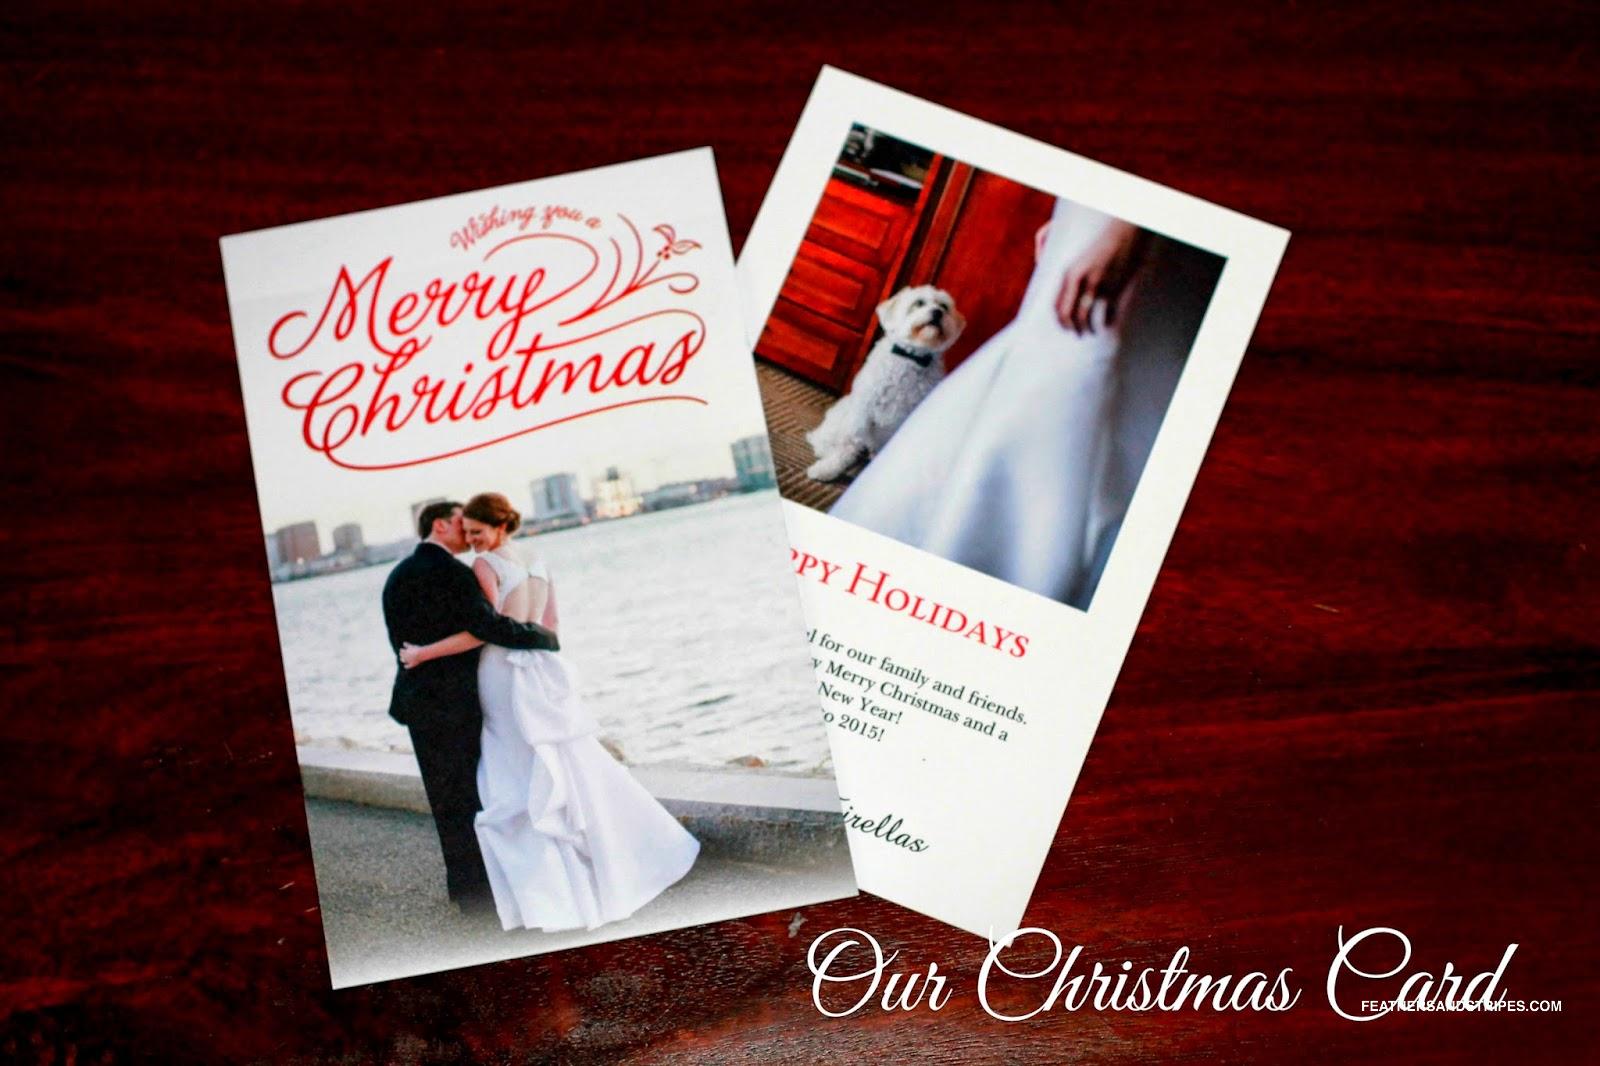 Our First Married Christmas Card